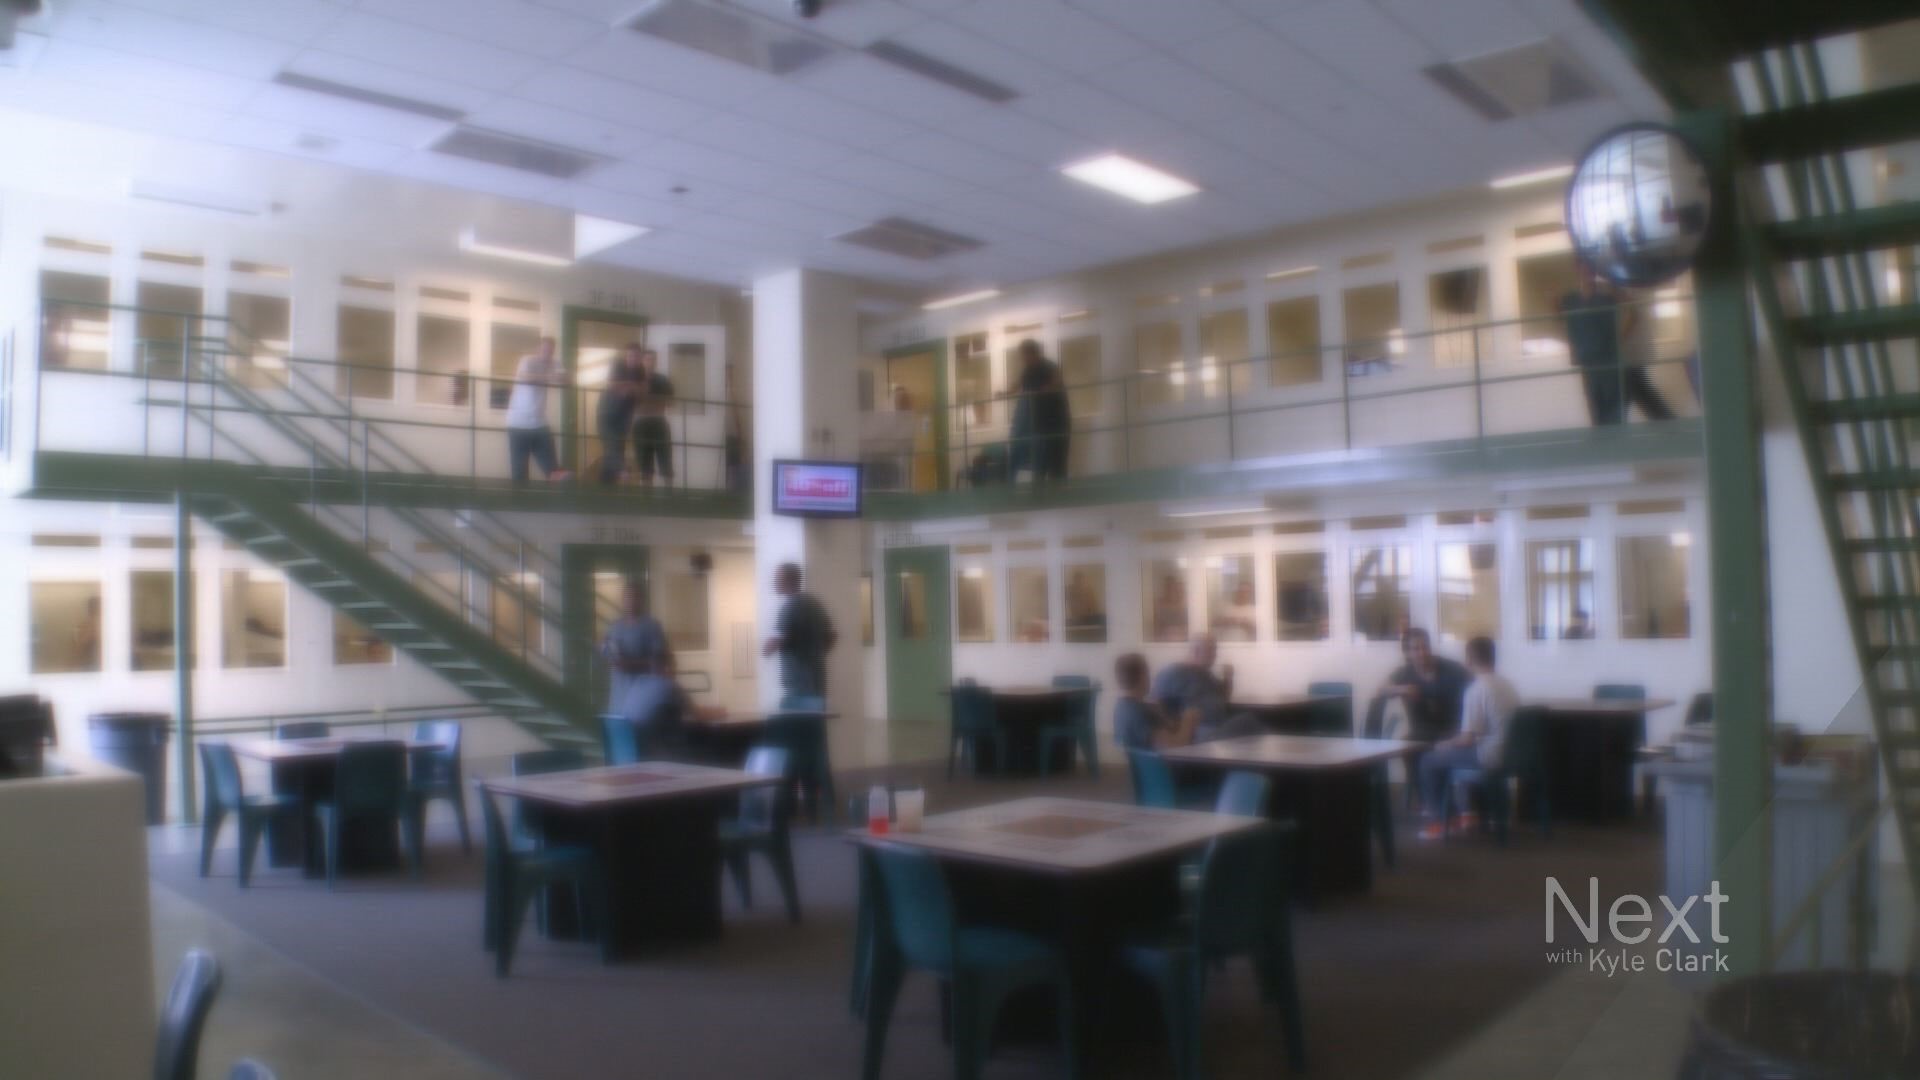 A new idea from Colorado's Prison Population Management Committee would take some 18-to-25 year-olds out of adult court and send them to juvenile court.